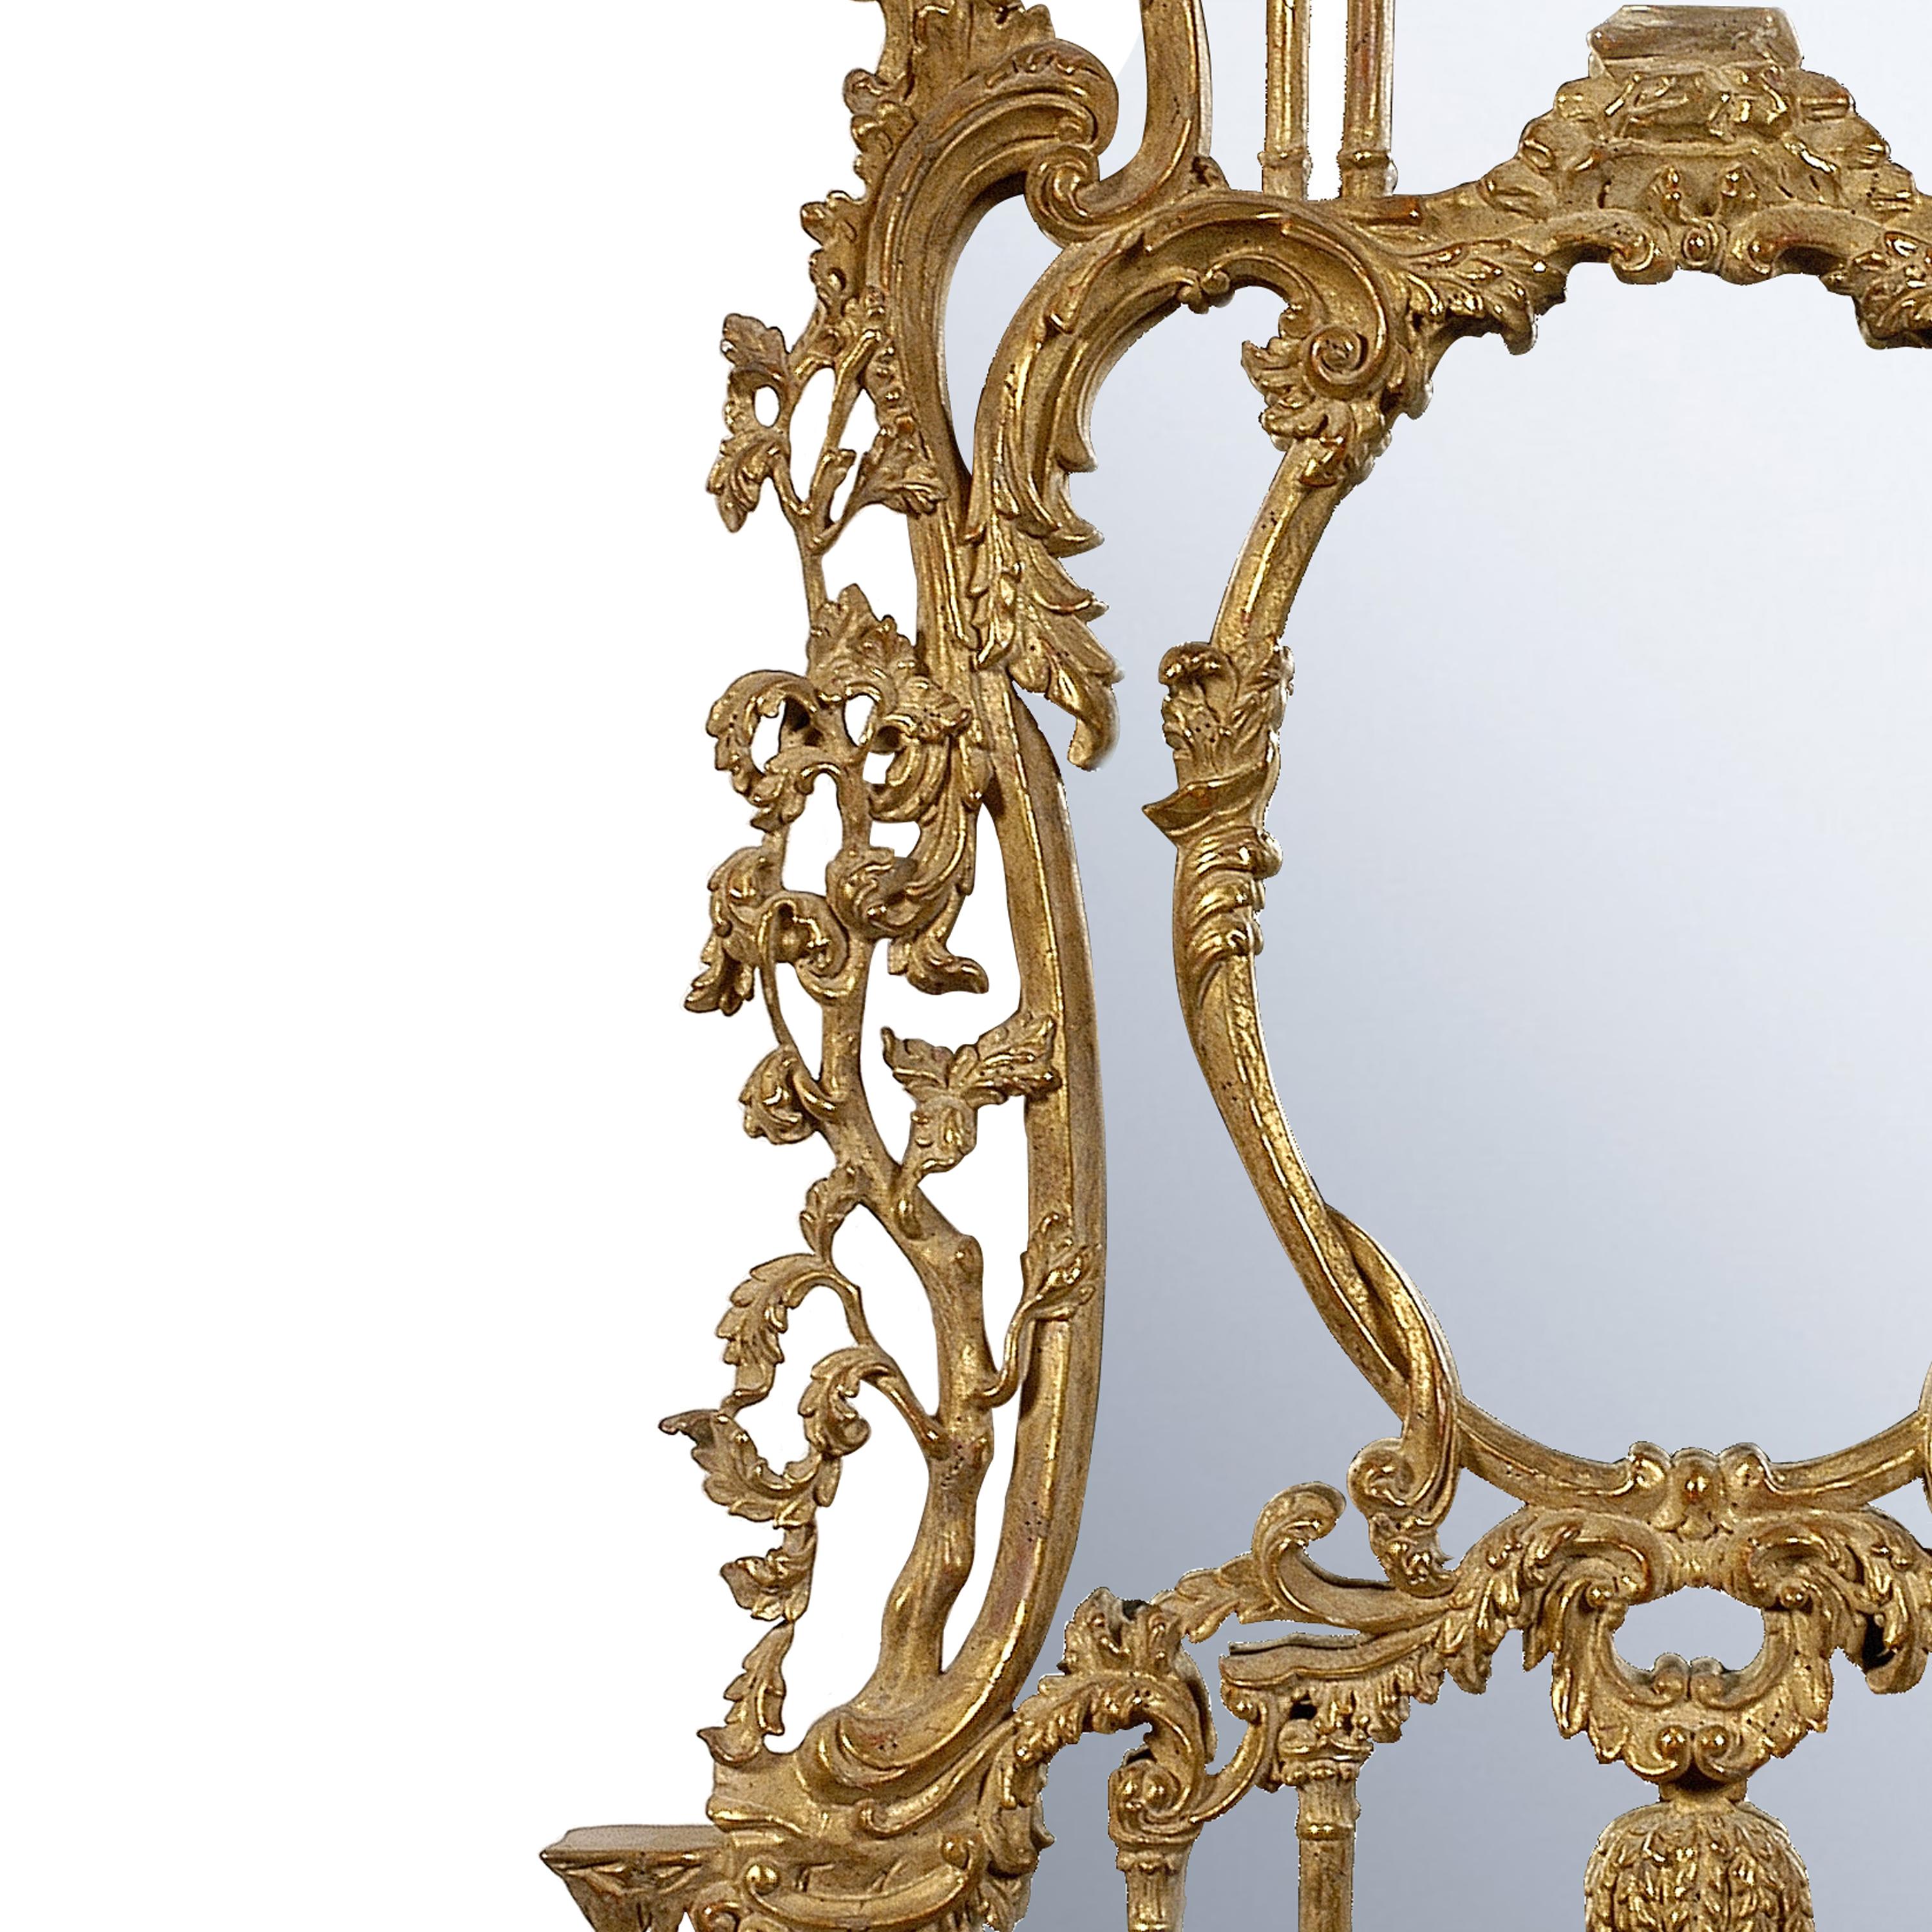 Handcrafted carved Chippendale style wood mirror covered in gold foil.